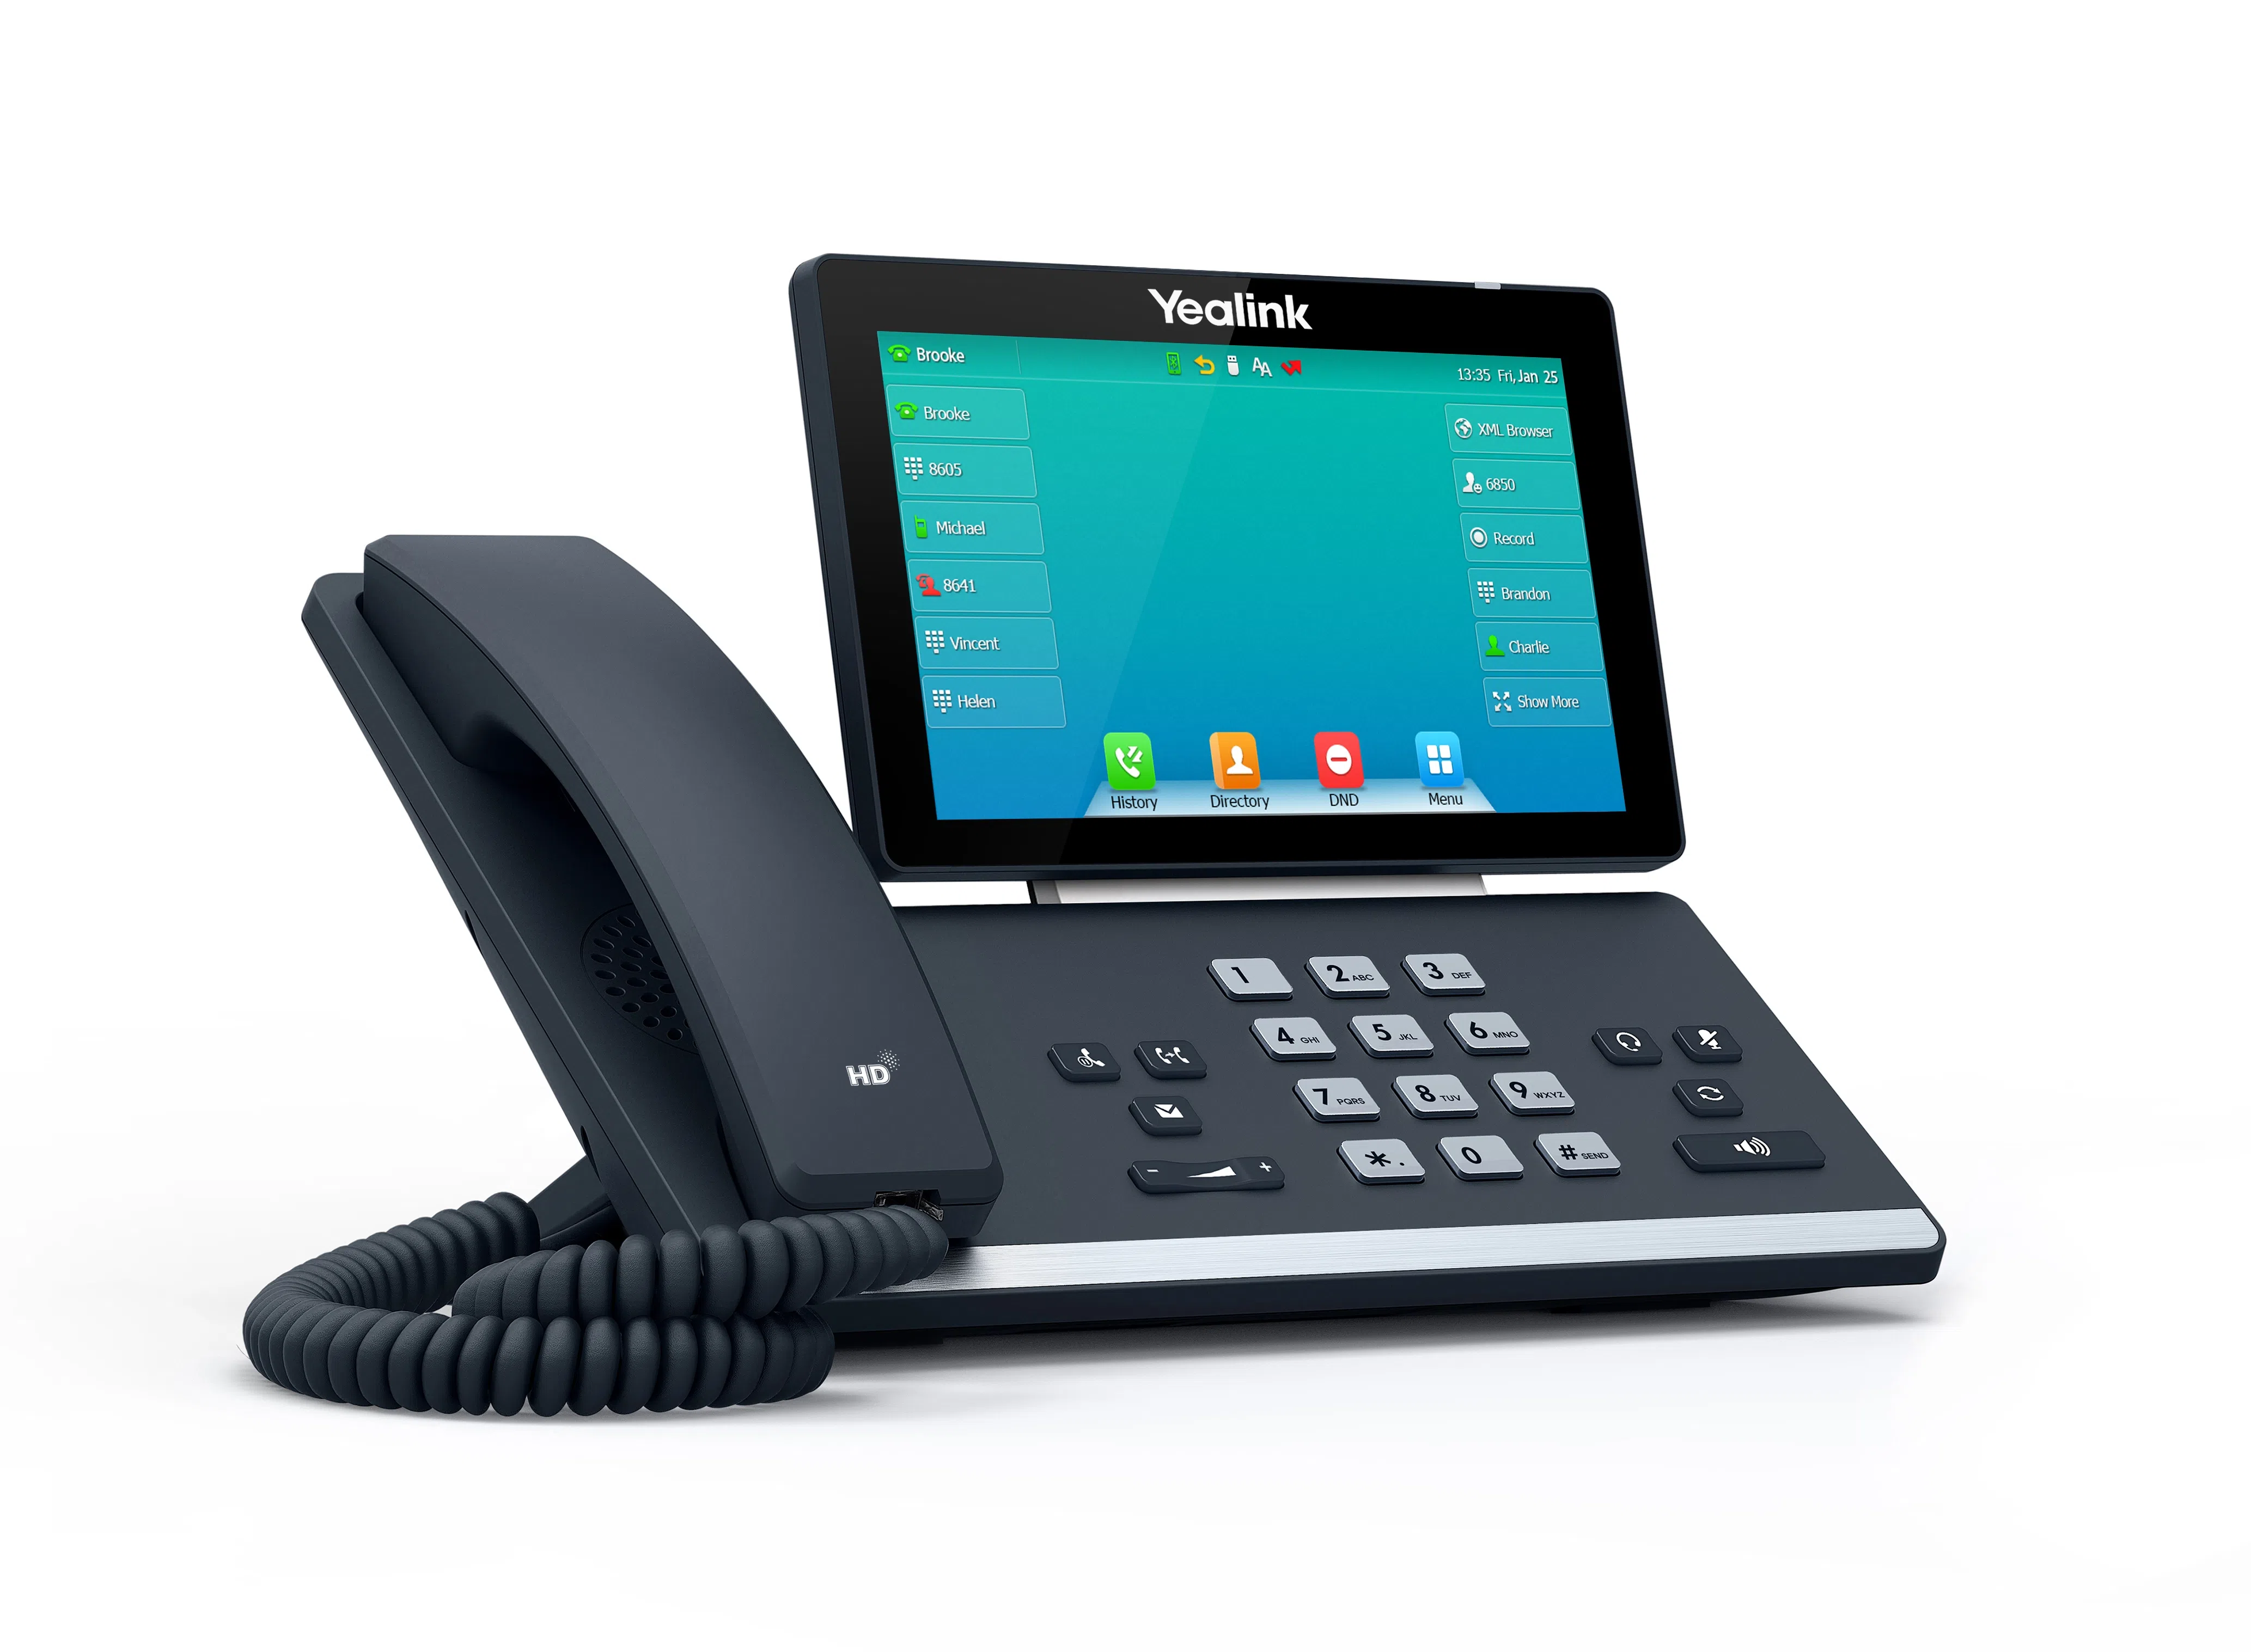 Which operating system is used in the Yealink T57W Premium IP Phone?